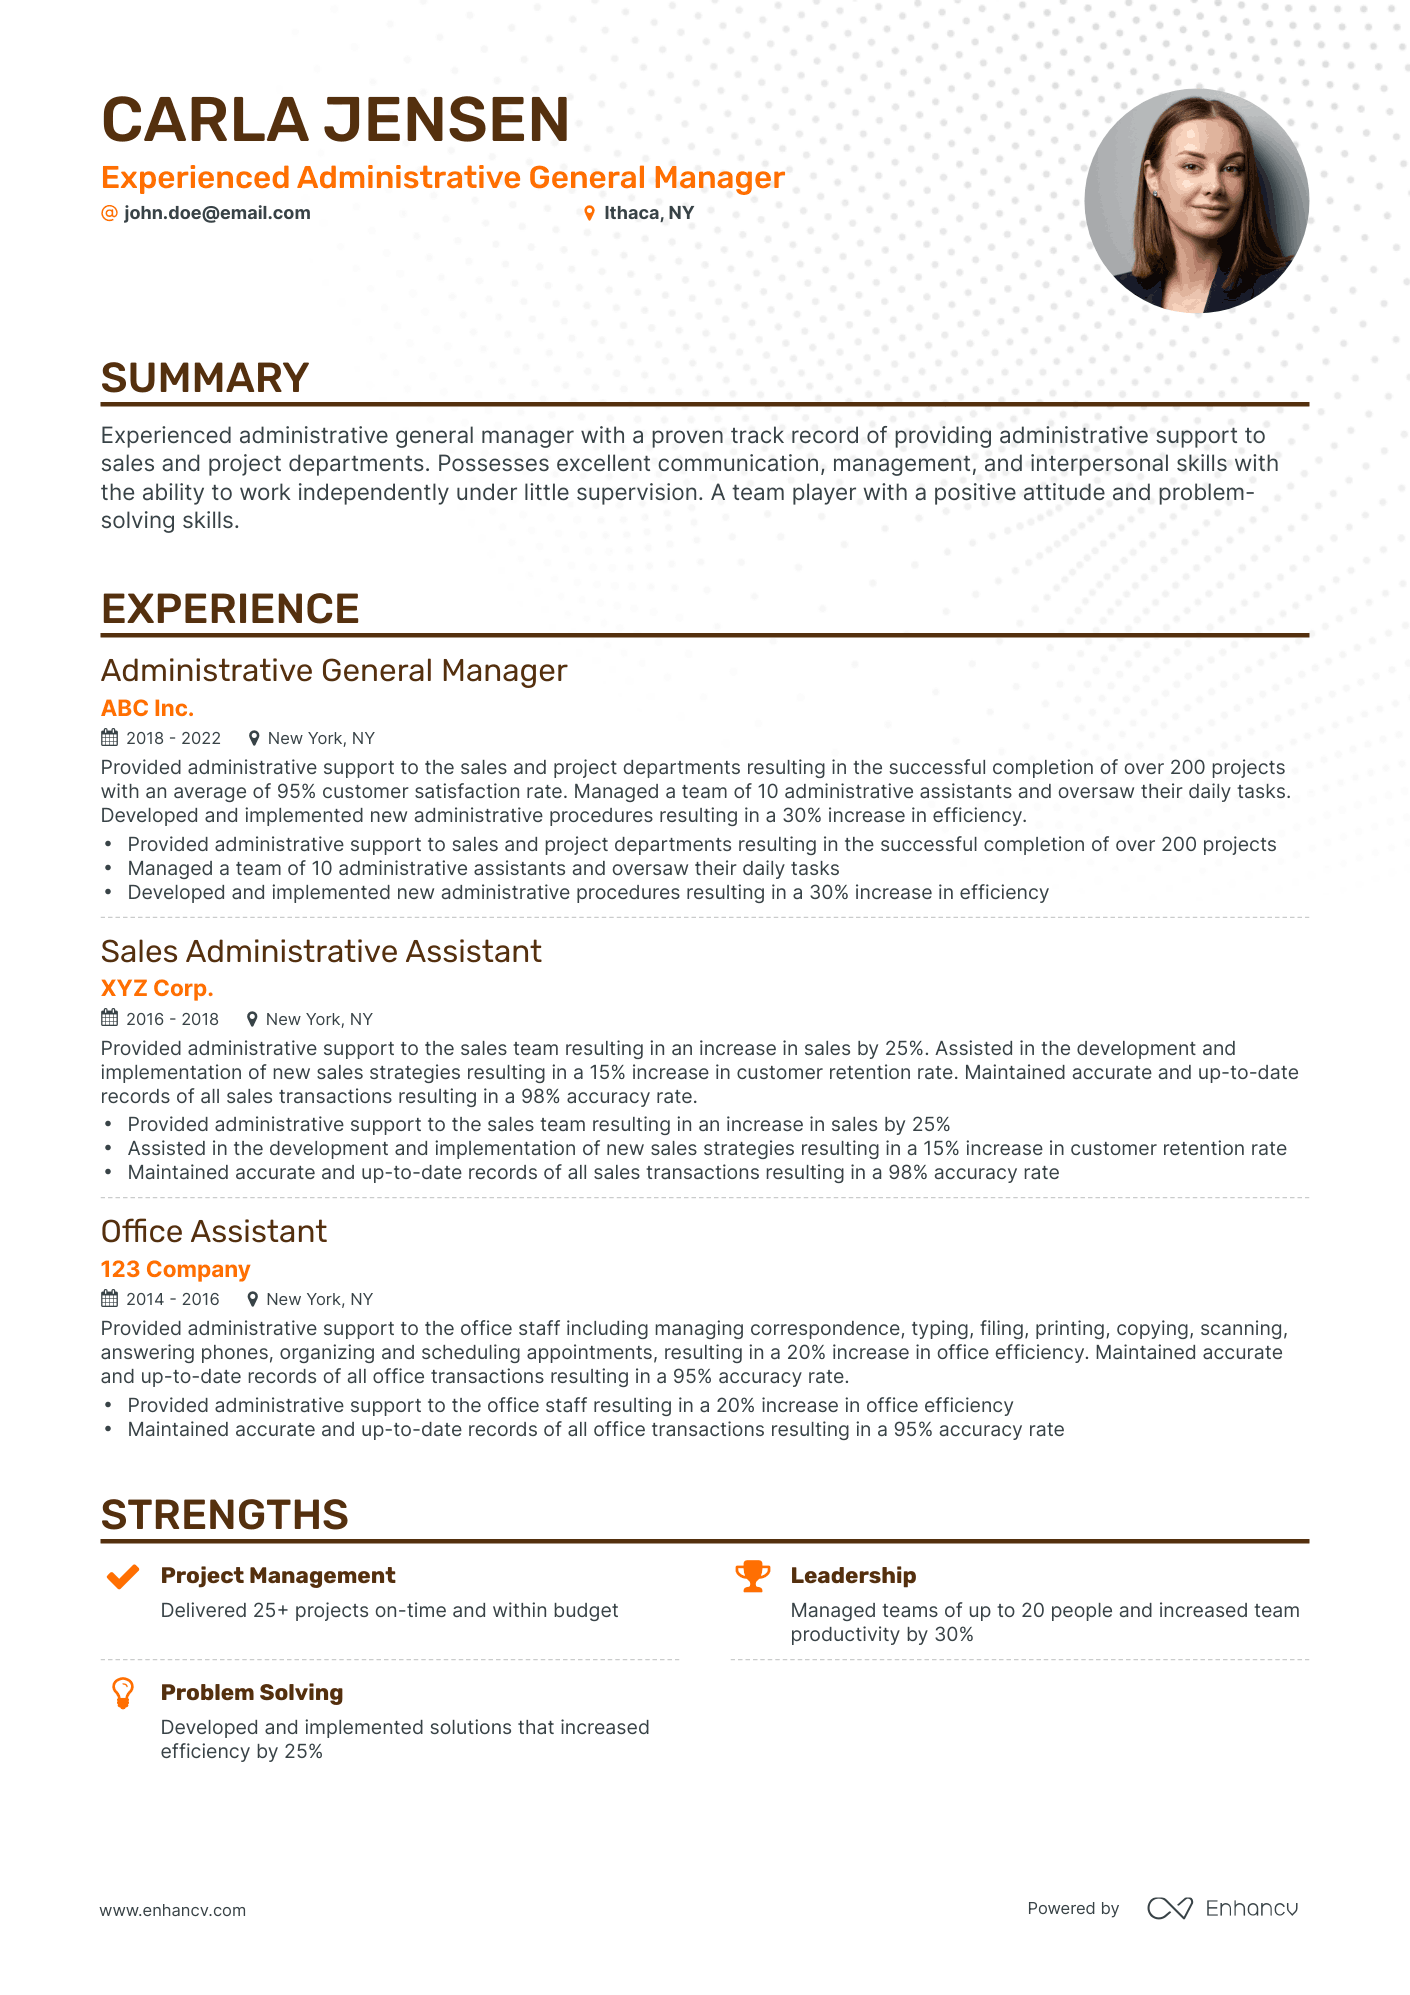 Classic Administrative General Manager Resume Template